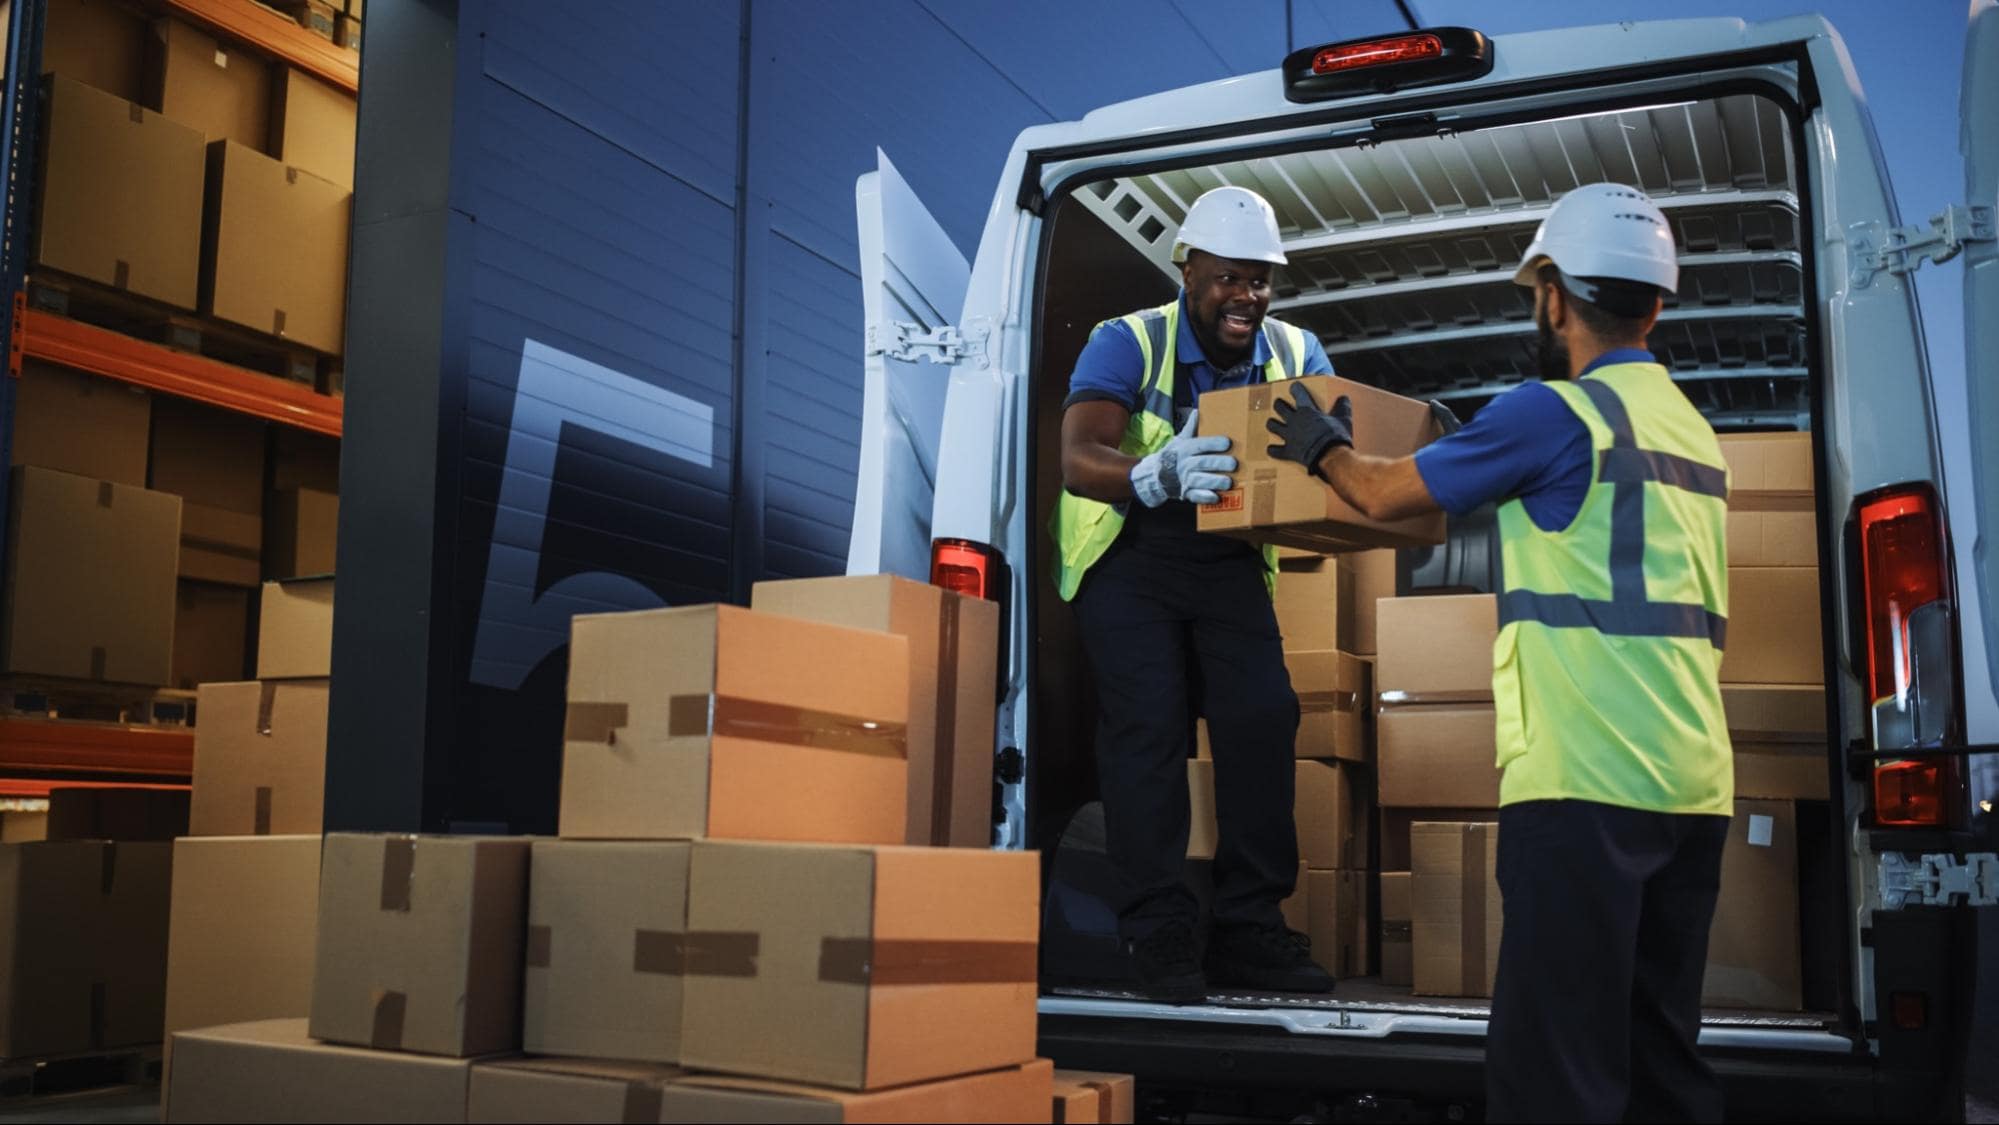 Delivery workers unloading boxes in front if a warehouse docking area.